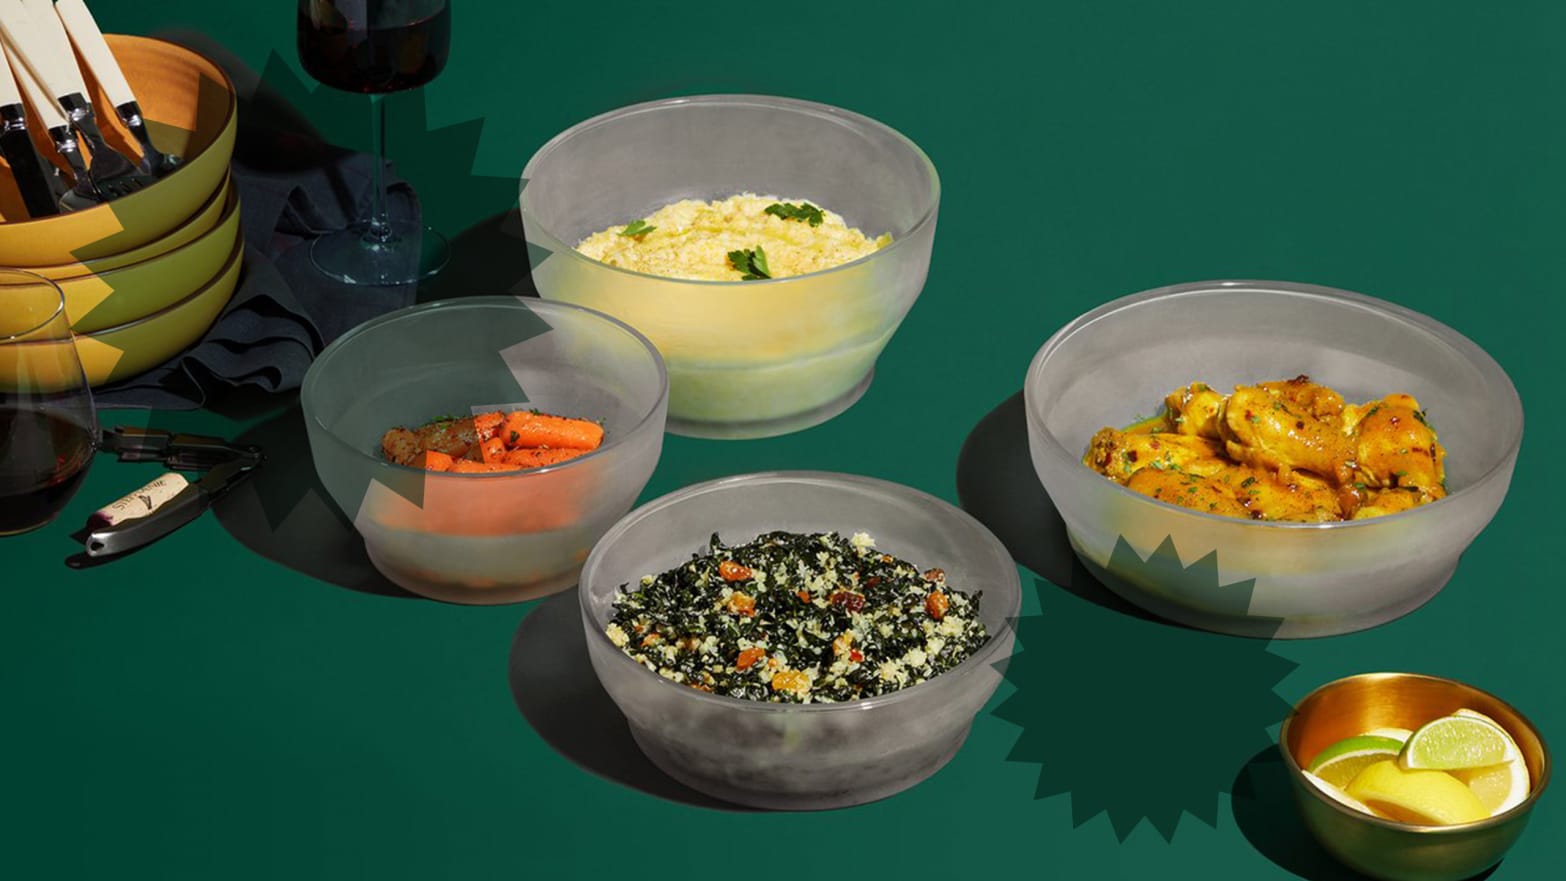 Anyday Microwave Cookware, Our Brands